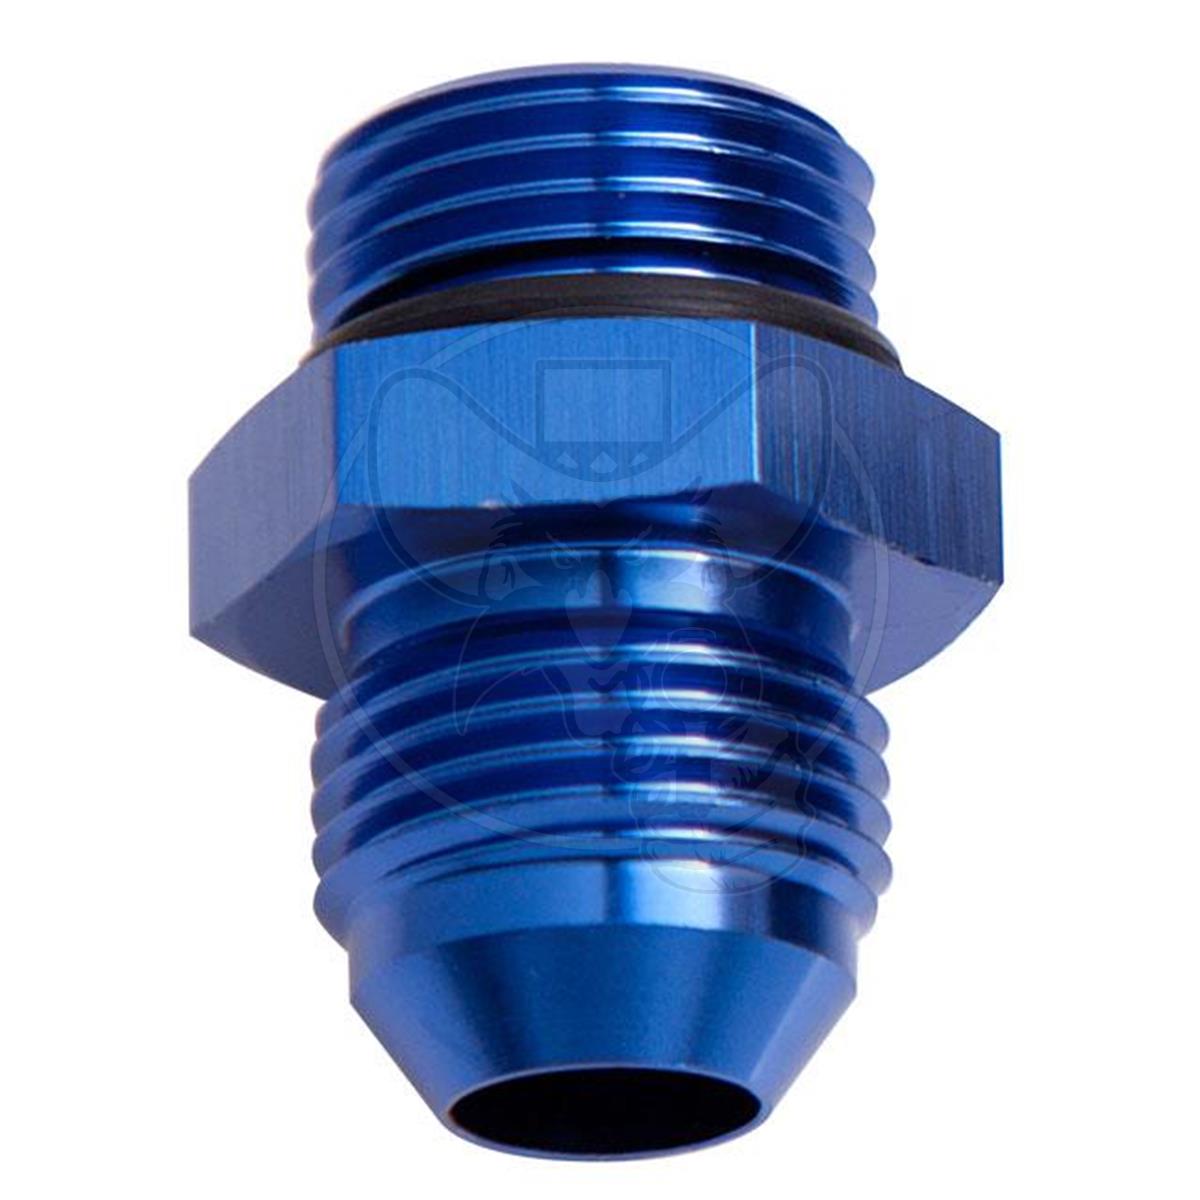 Aeroflow -10 ORB to -16AN Straight Male Flare Adapter - Blue